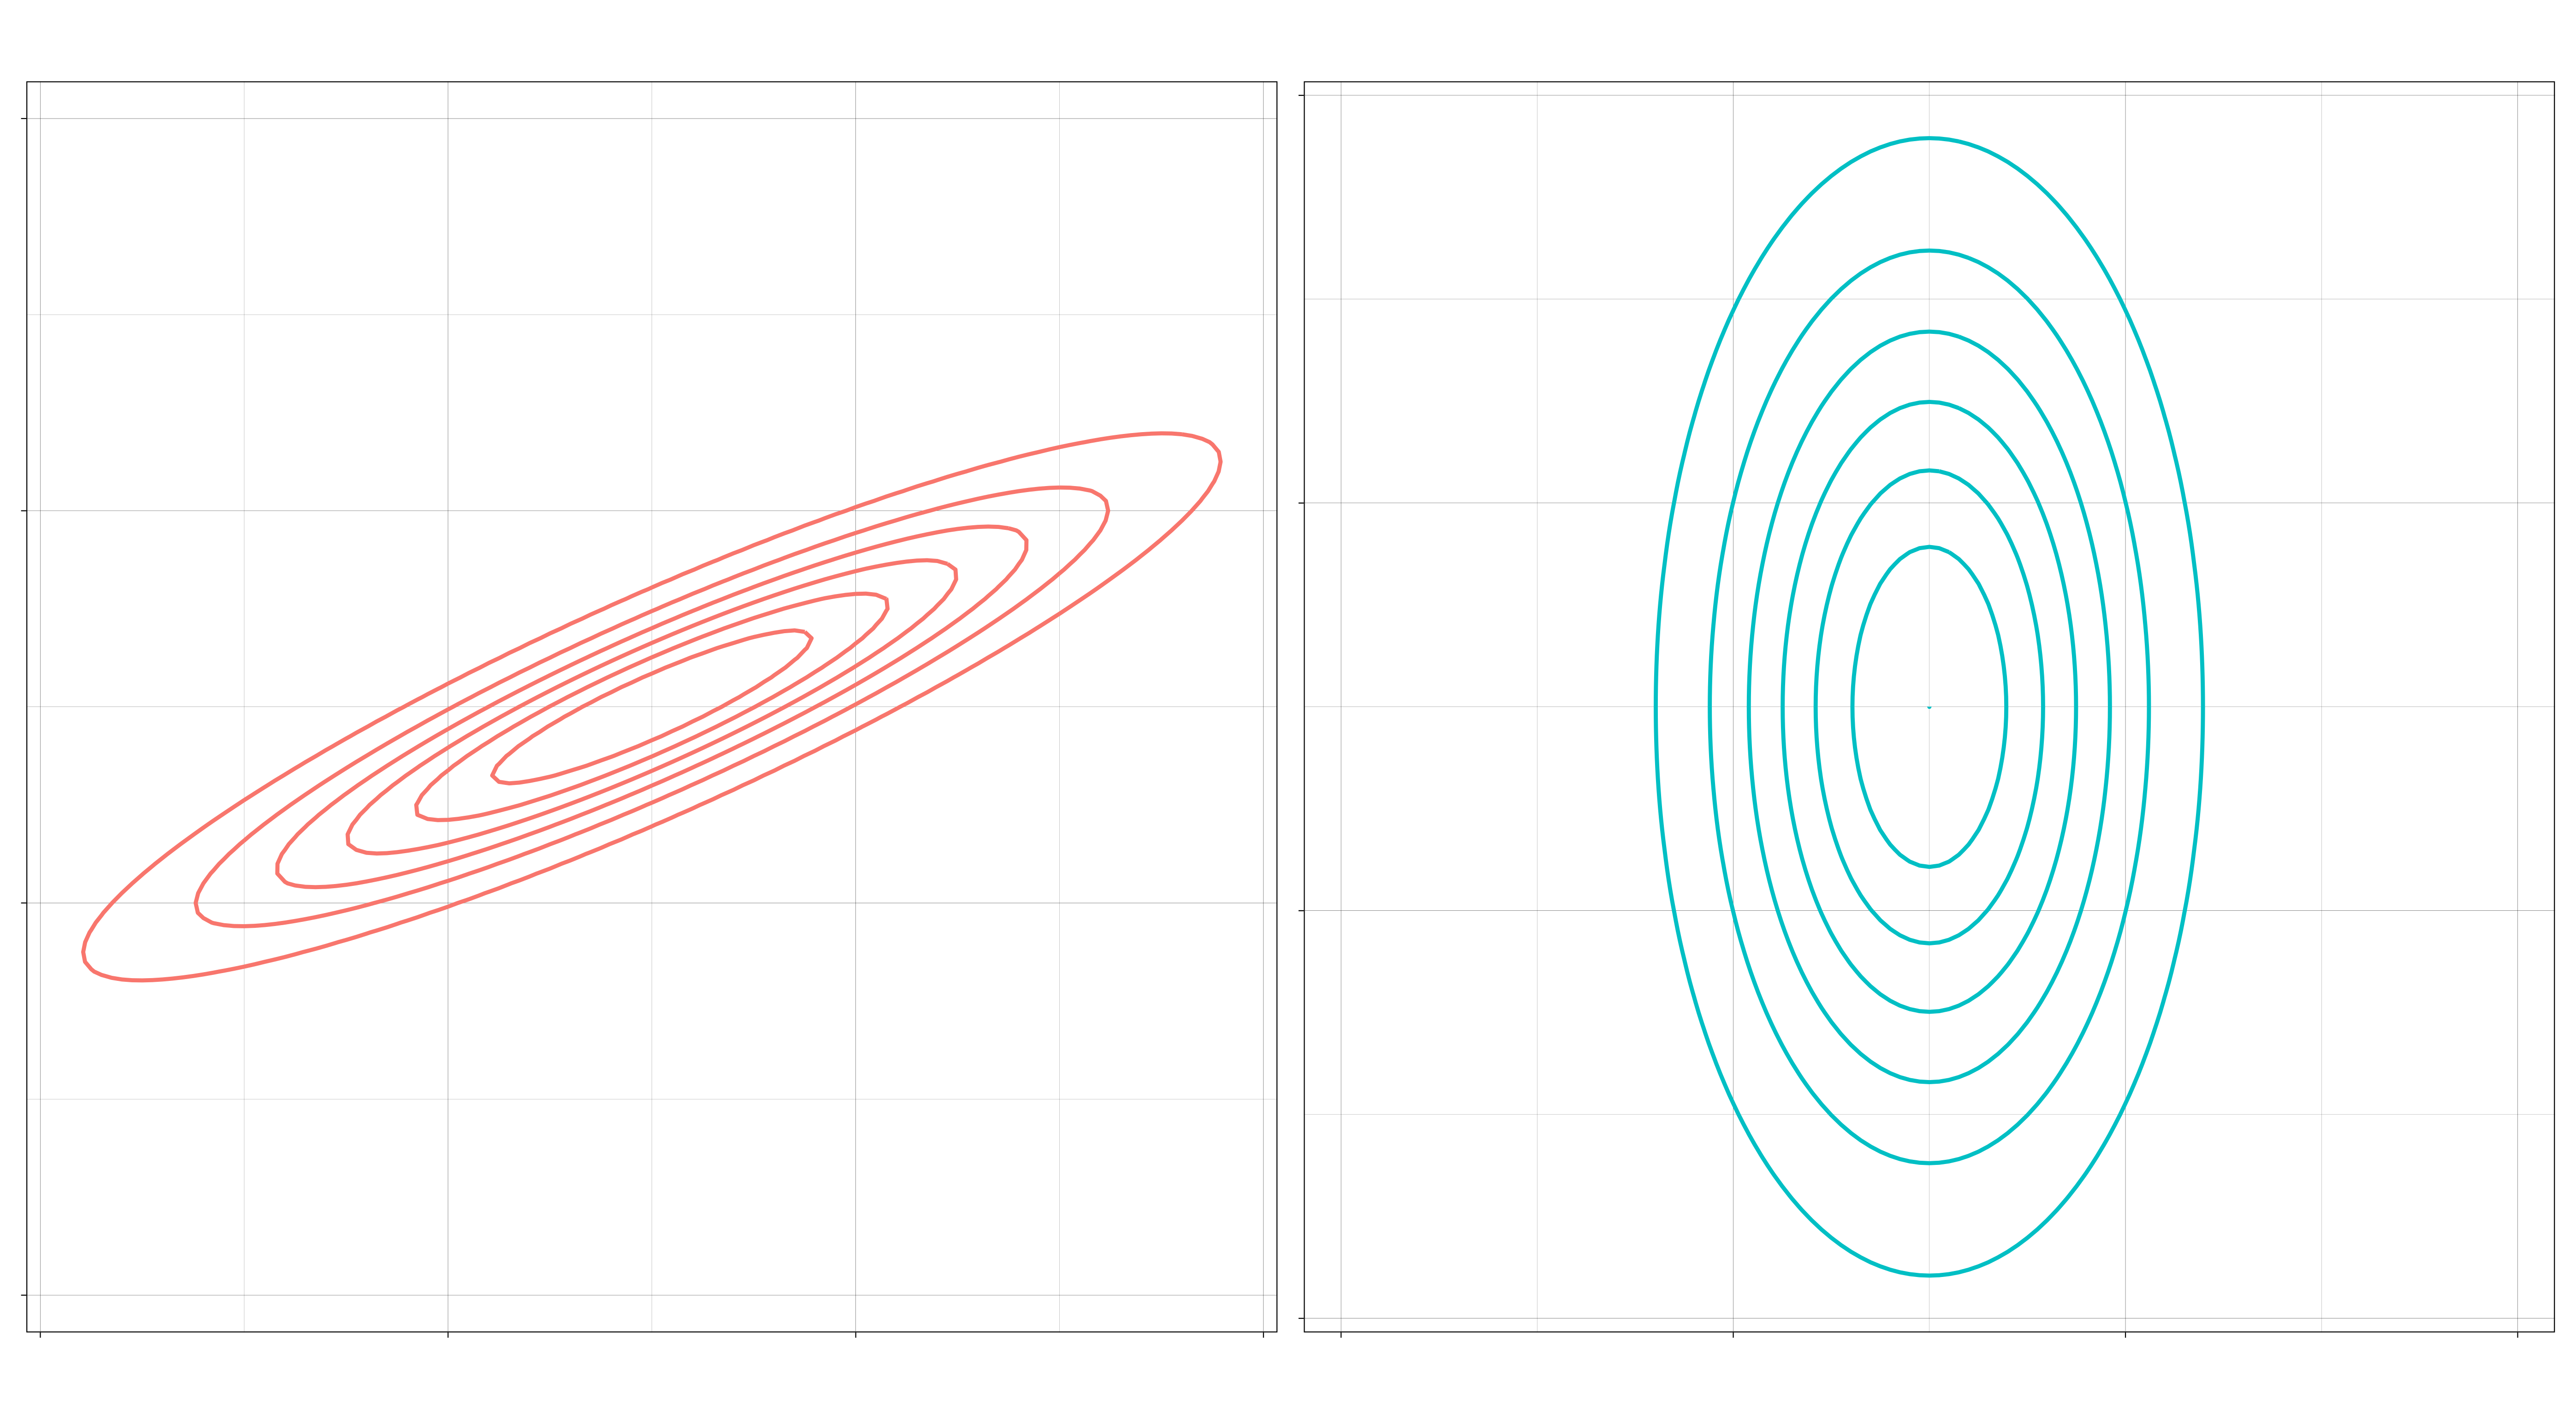 Left: Distribution with correlated features. Right: Distribution with uncorrelated features.